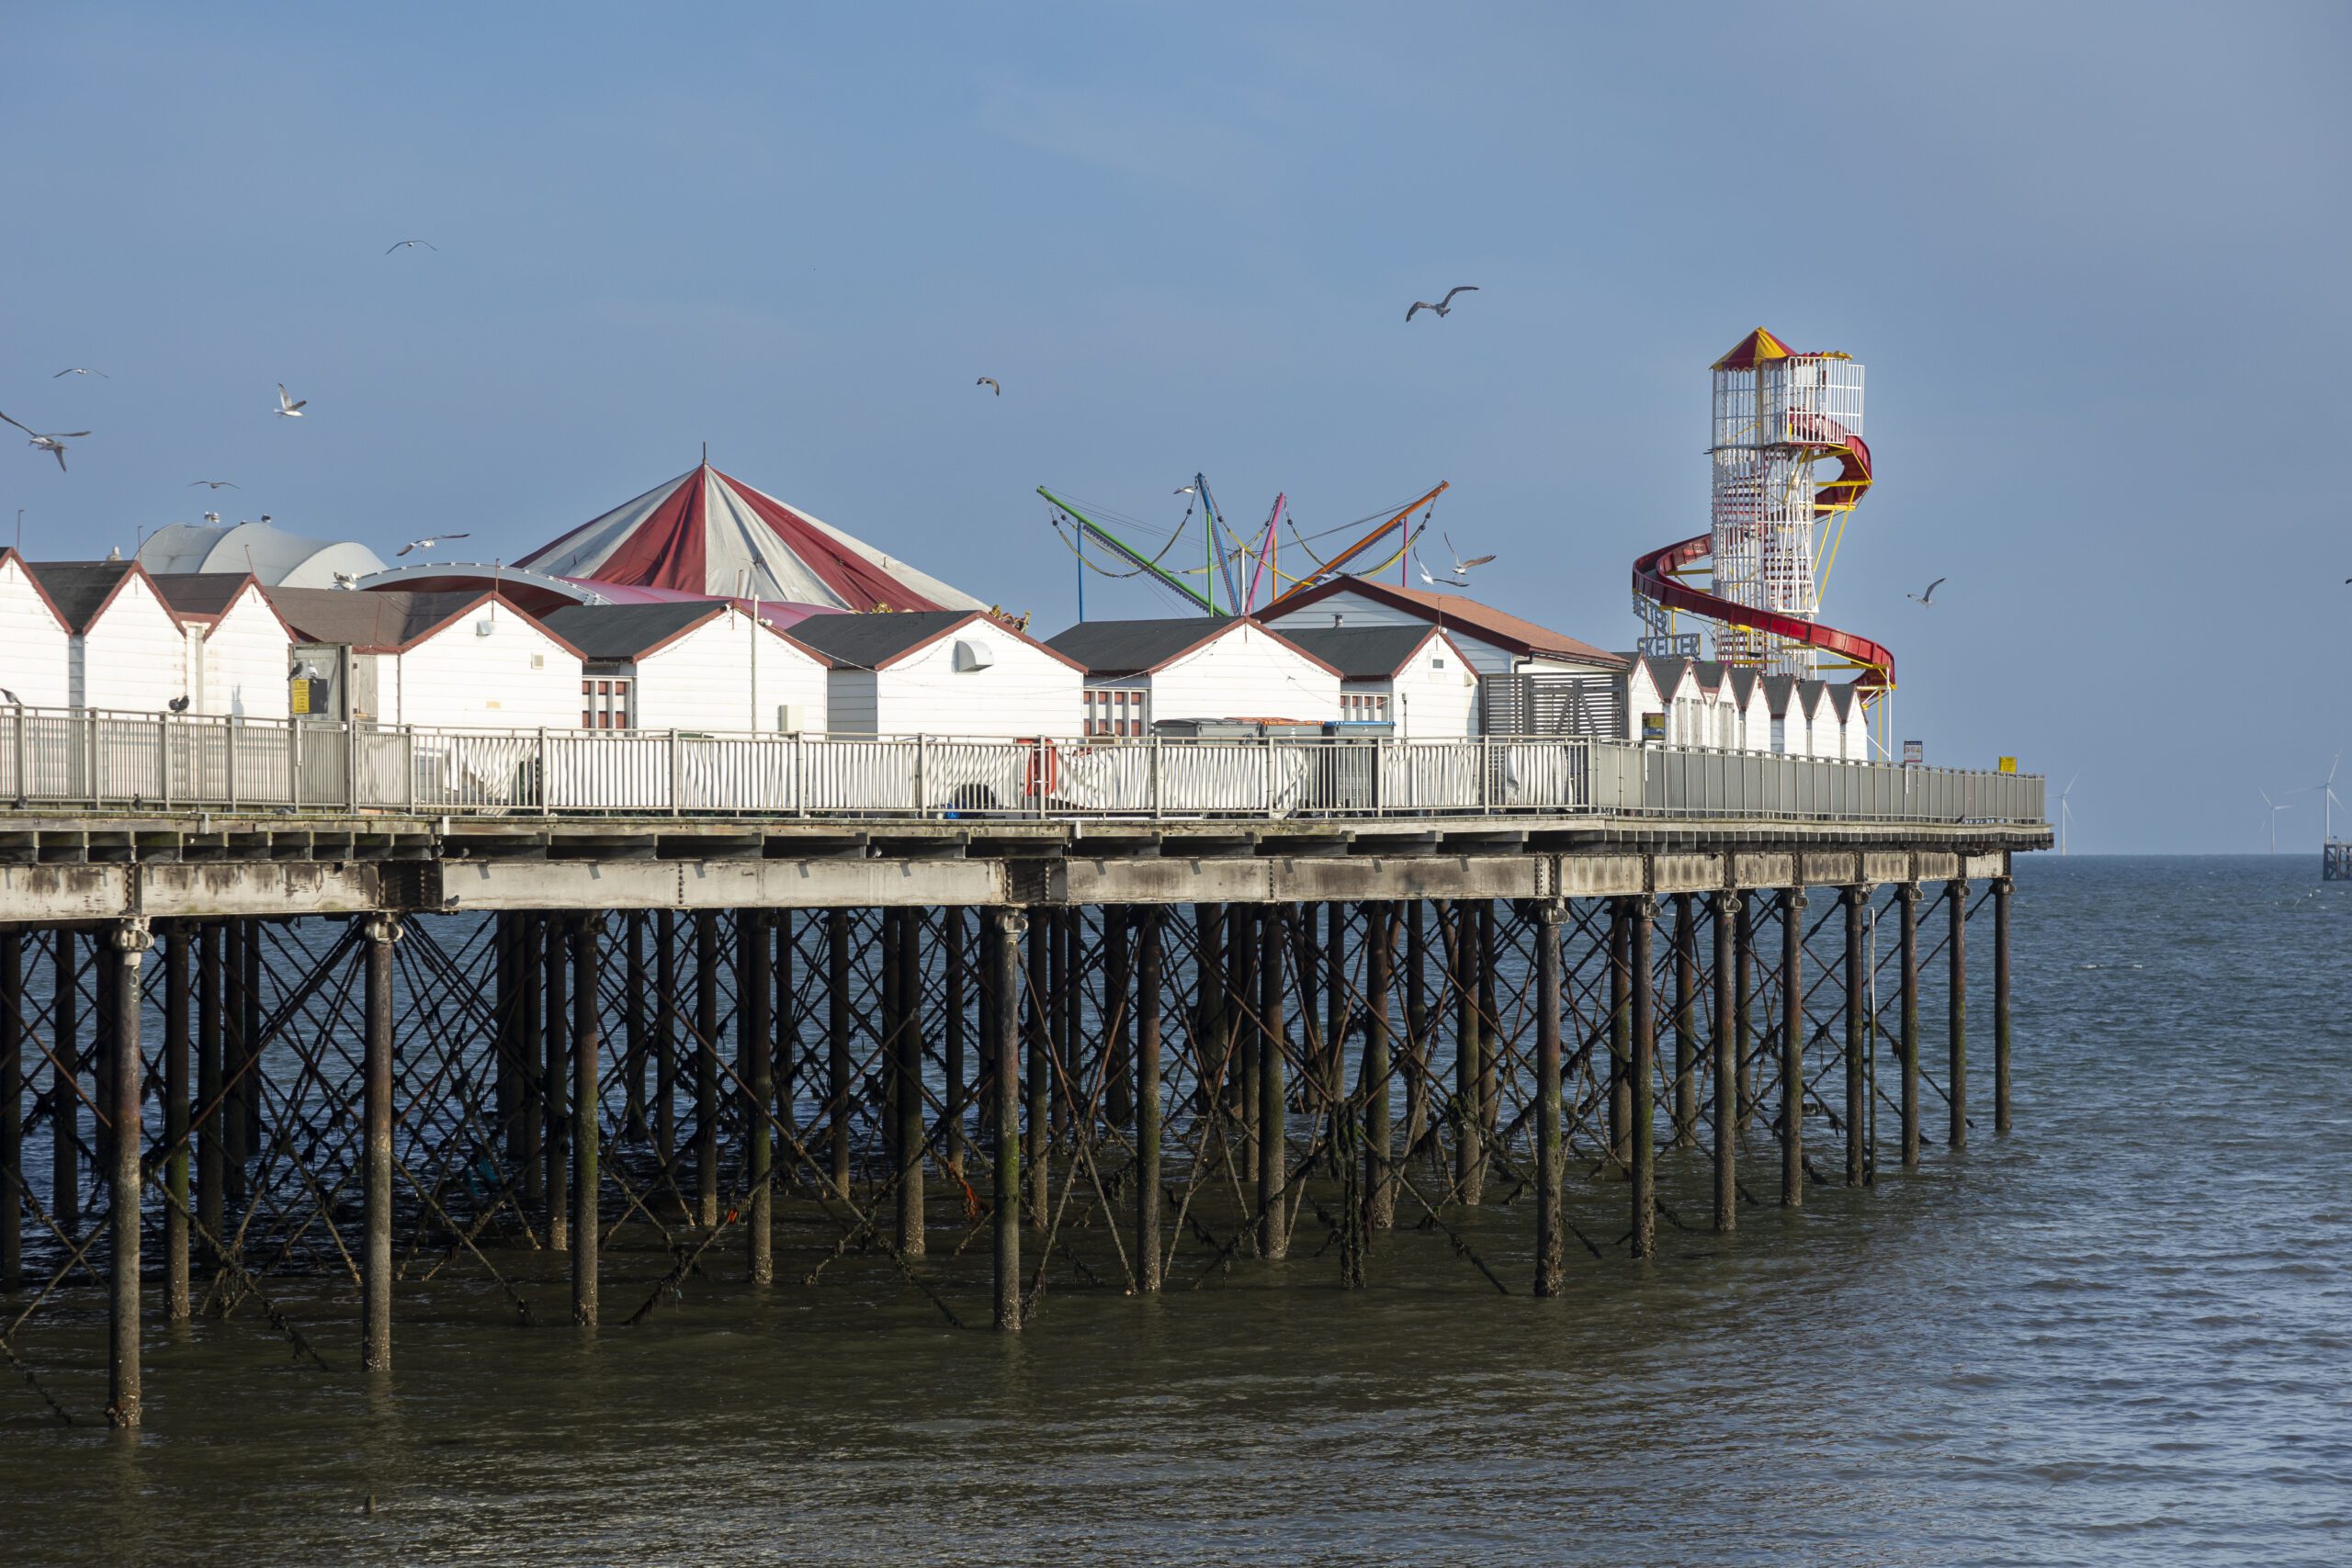 Herne bay pier with colourful roofs